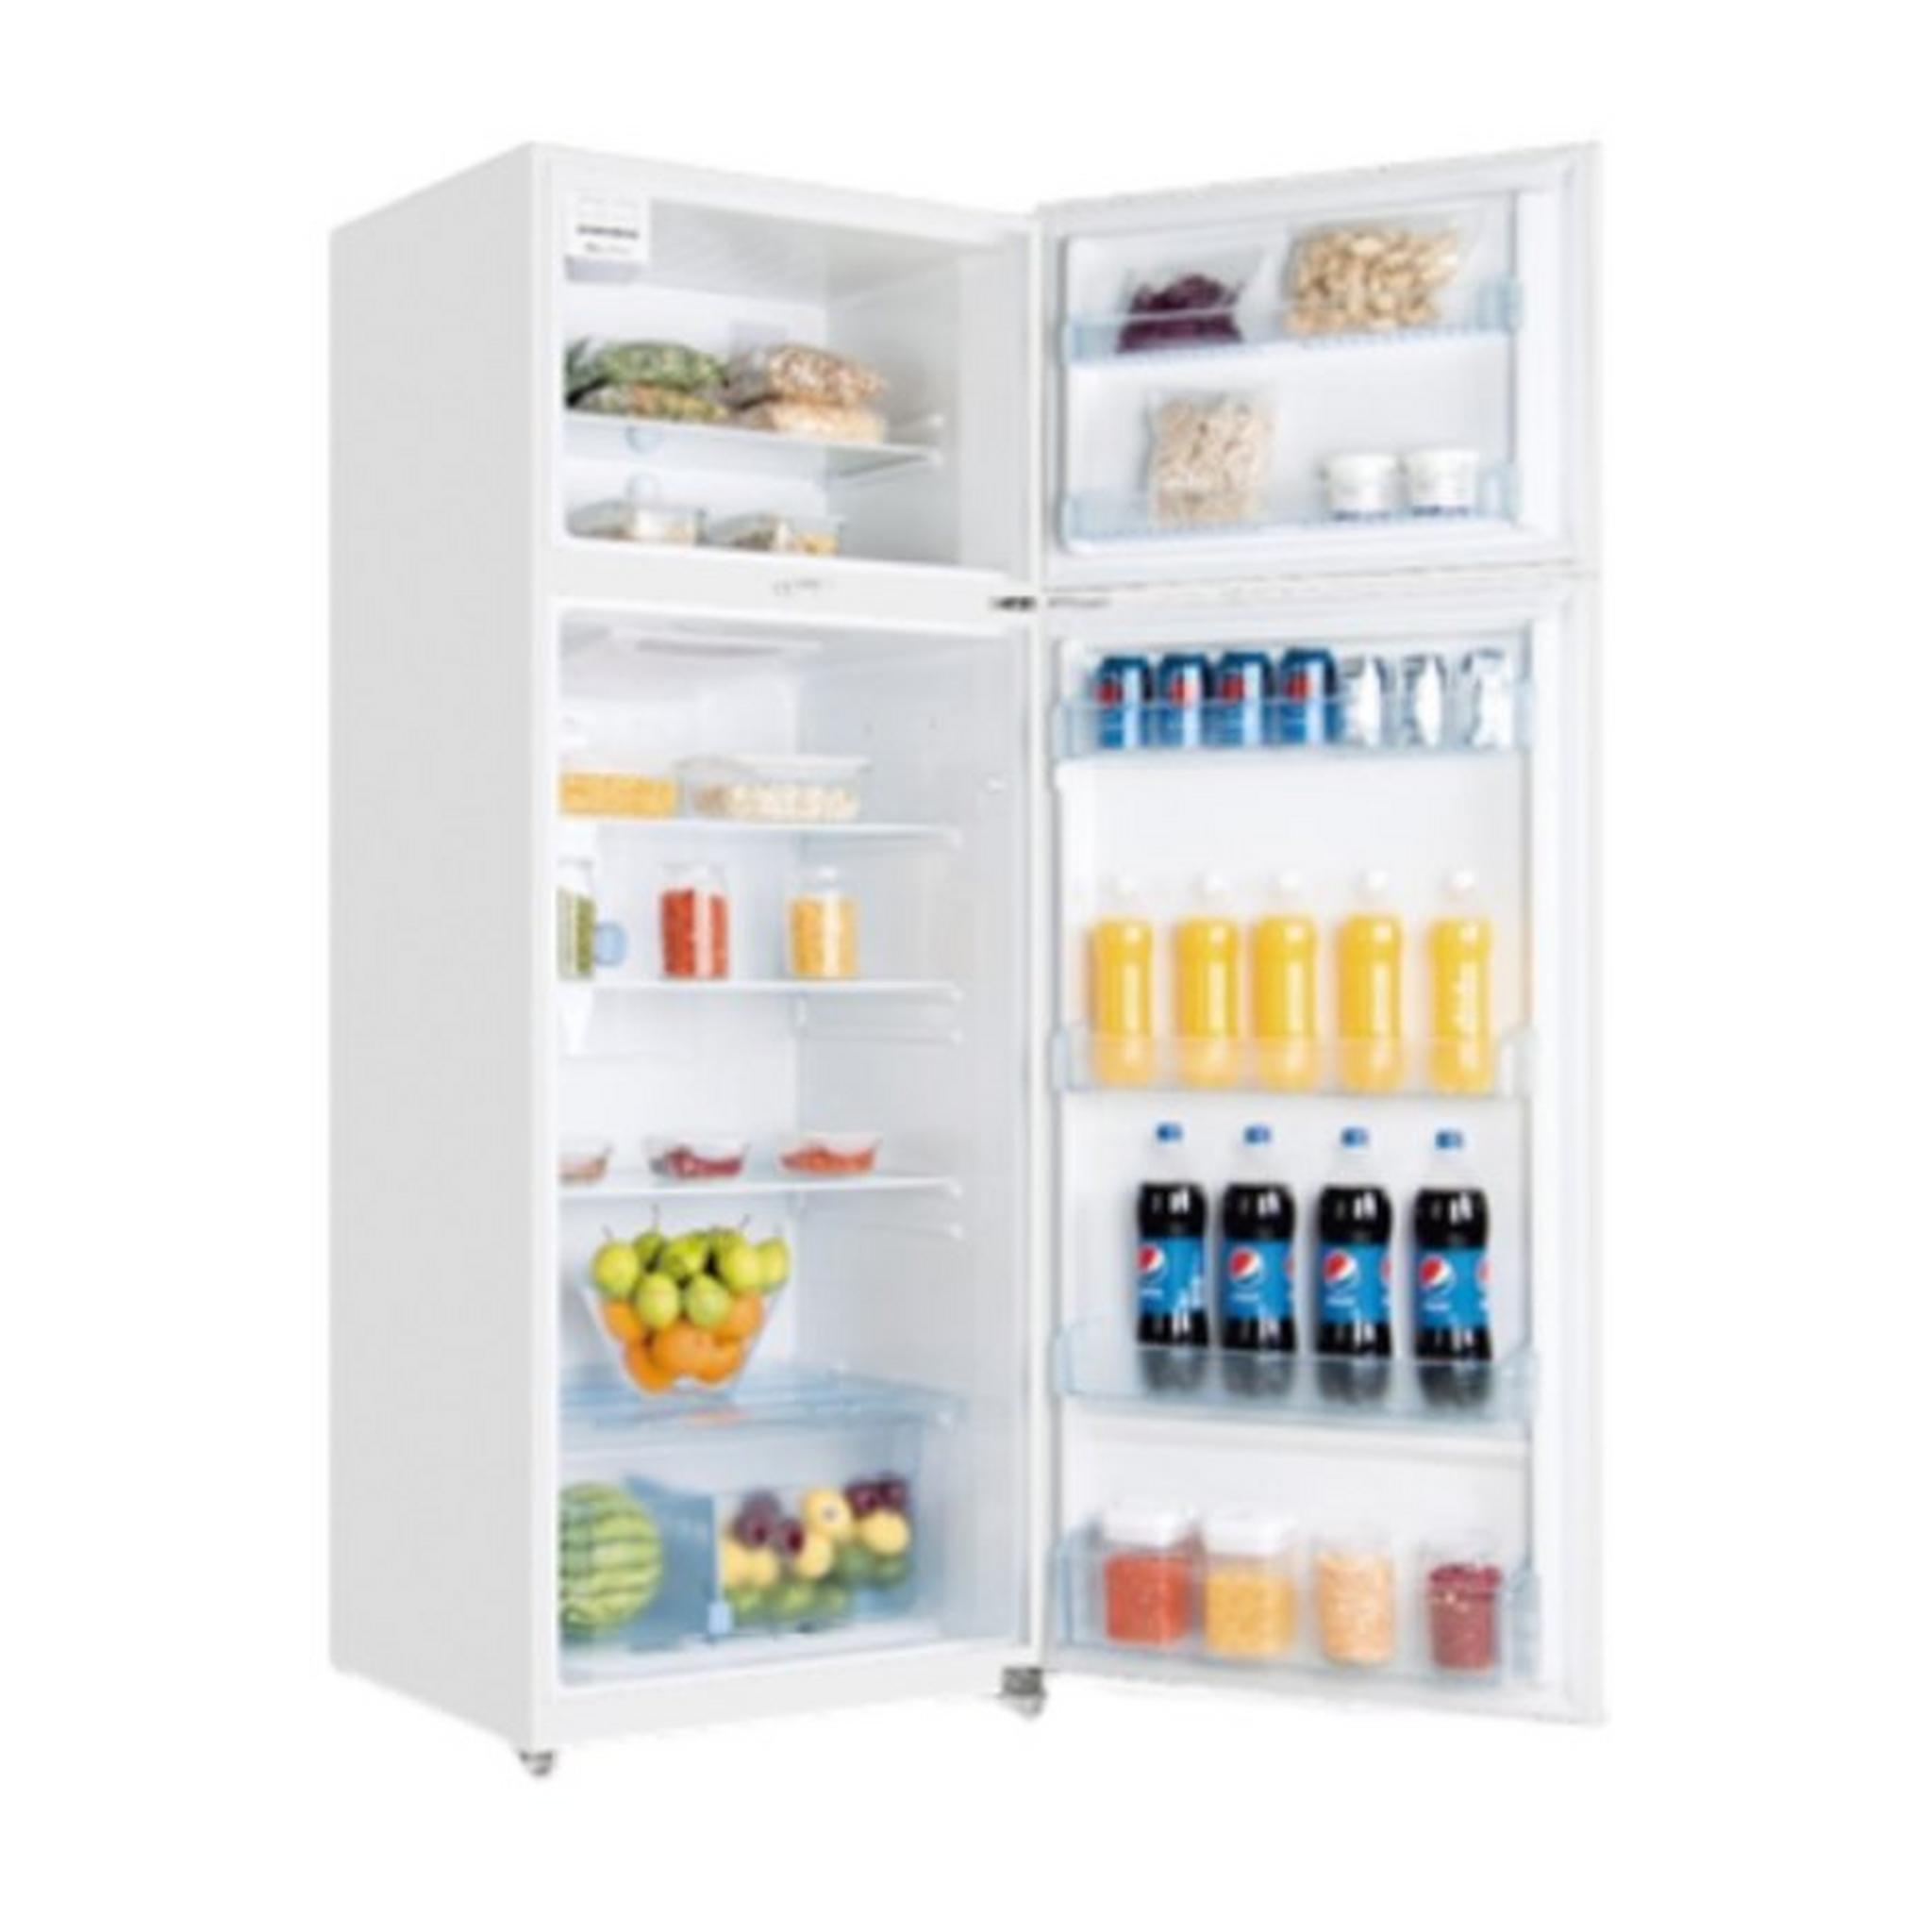 Haier 23CFT Top Mount Refrigerator (HRF-650WH)